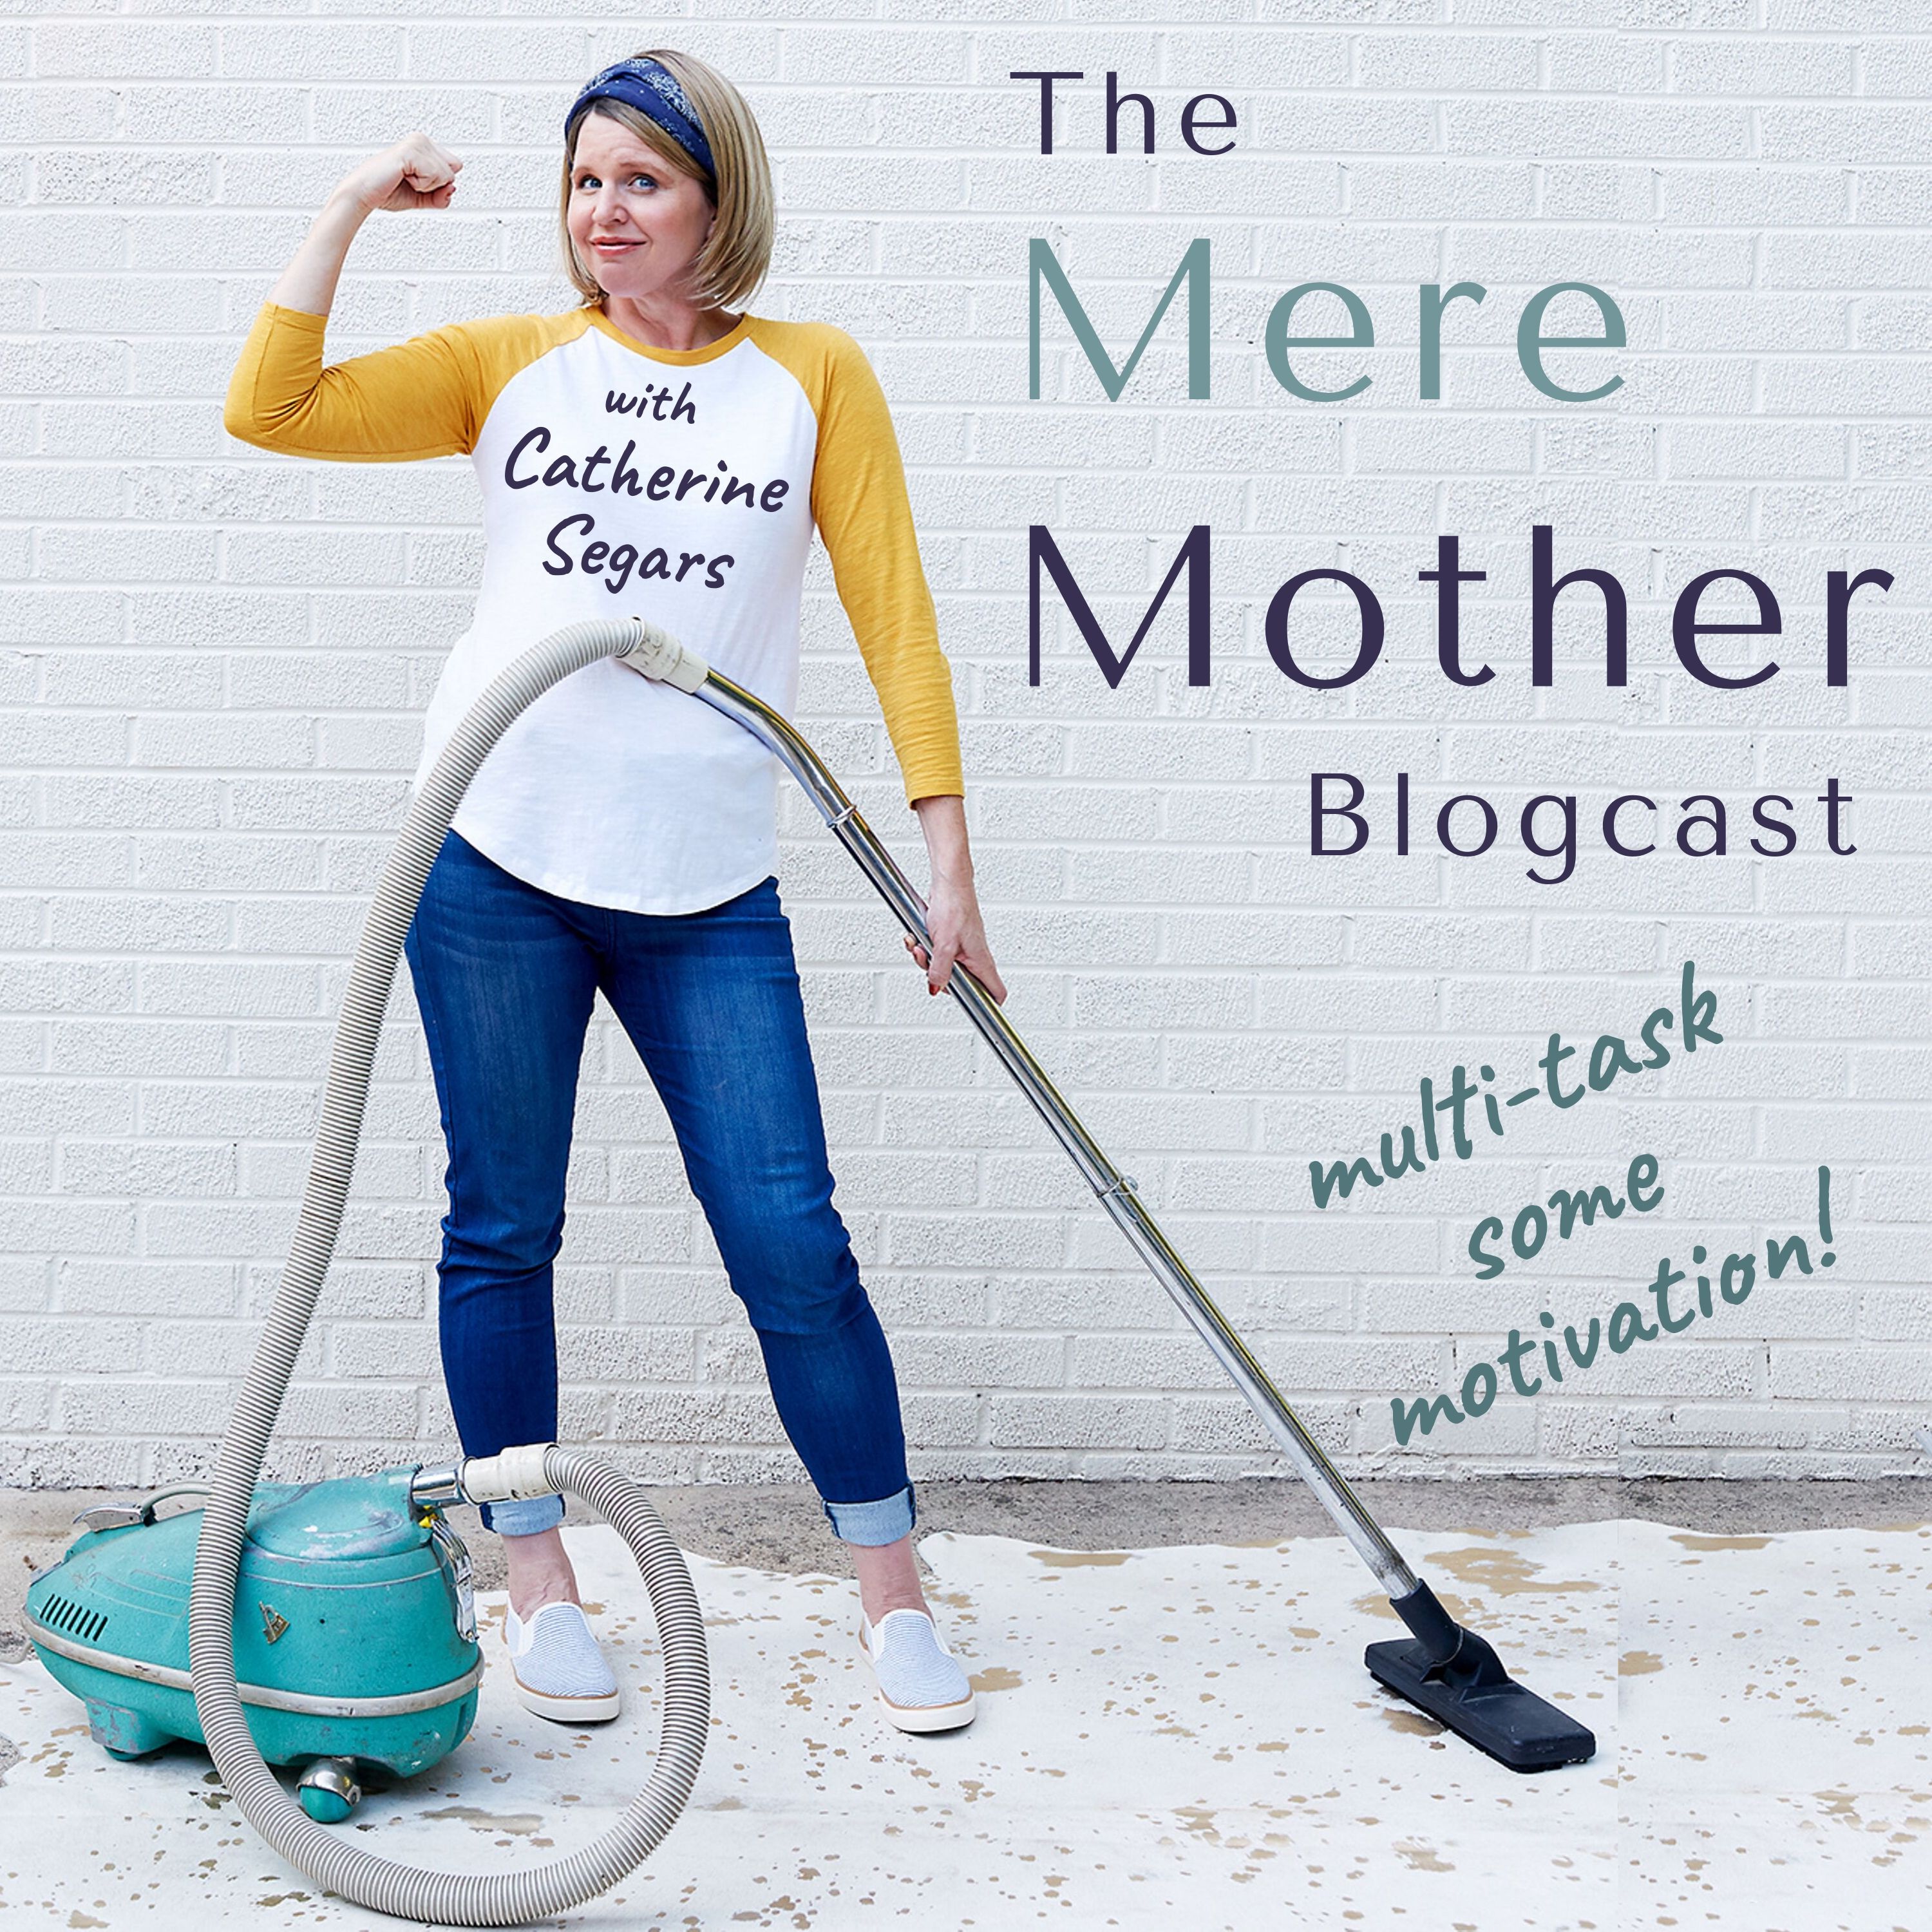 The Mere Mother Blogcast with Catherine Segars